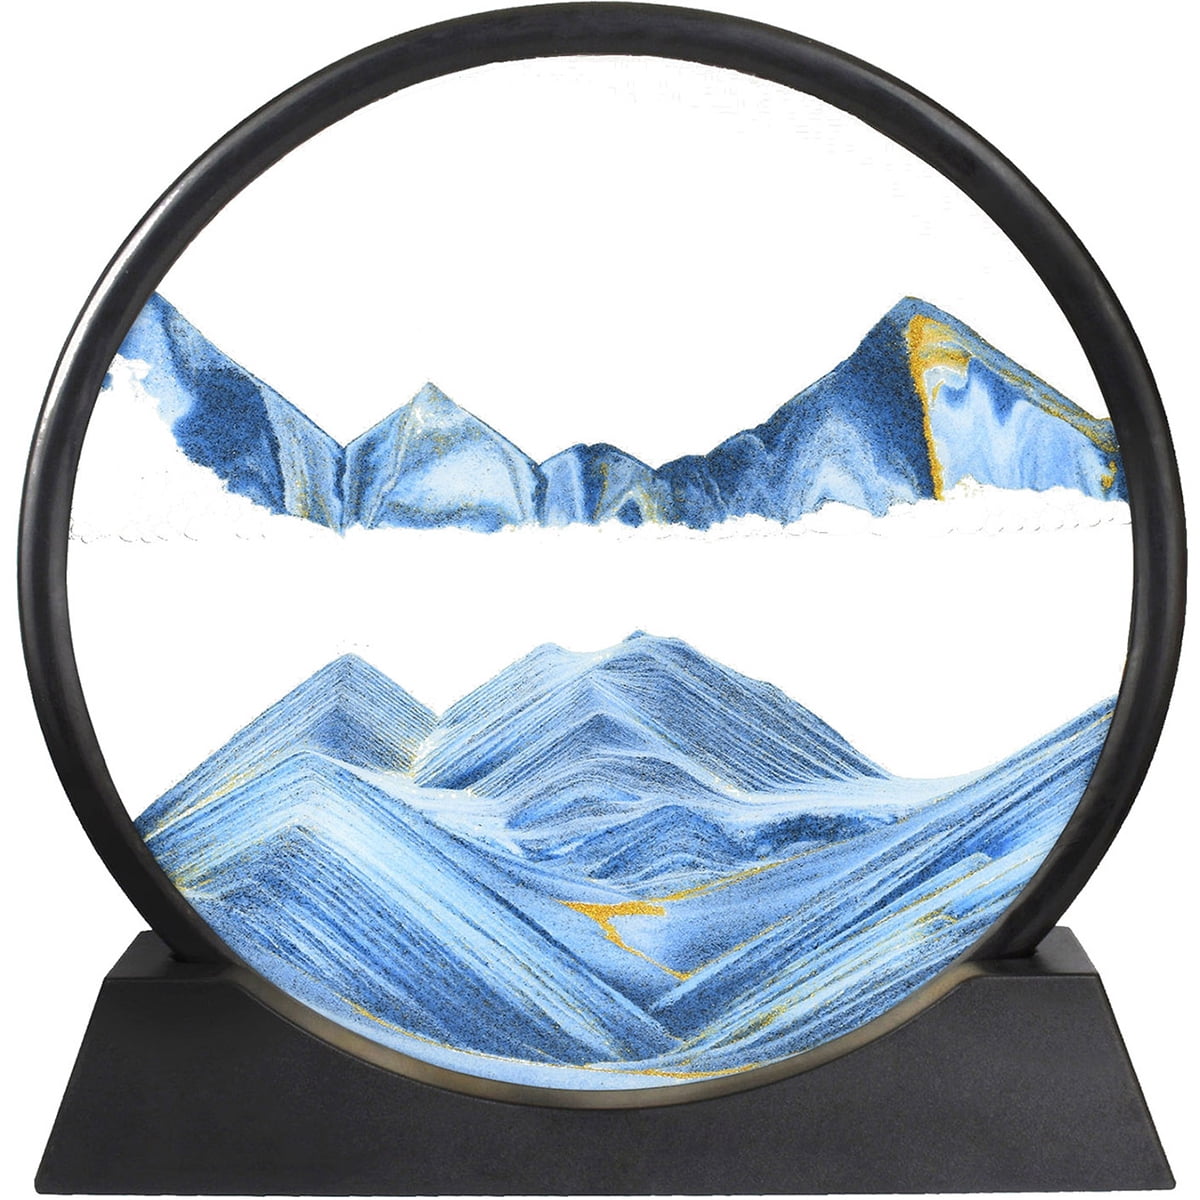 Dynamic Moving Sands Art 3D Deep Sea Flowing Sand Picture Home Decoration-7inch 